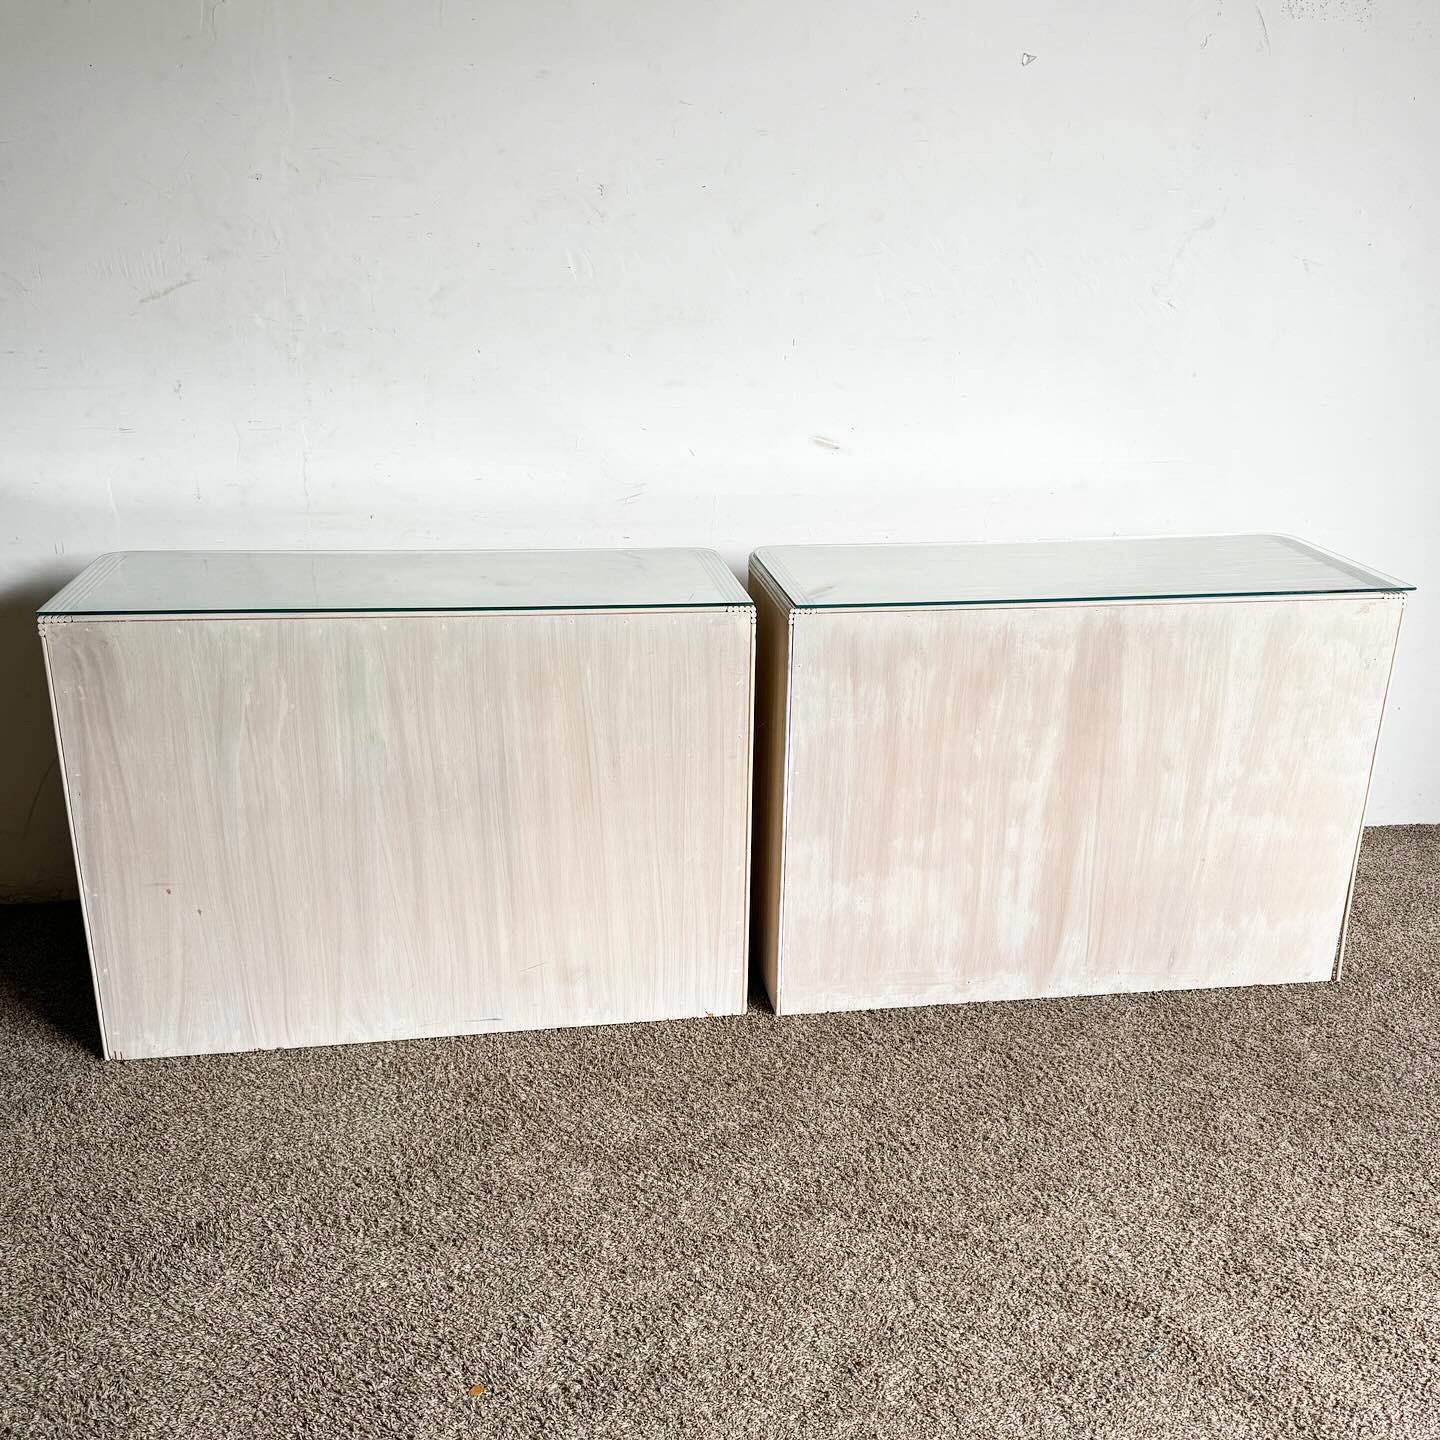 20th Century 1990s Boho Chic Pencil Reed Glass Top Chests of Drawers - a Pair For Sale